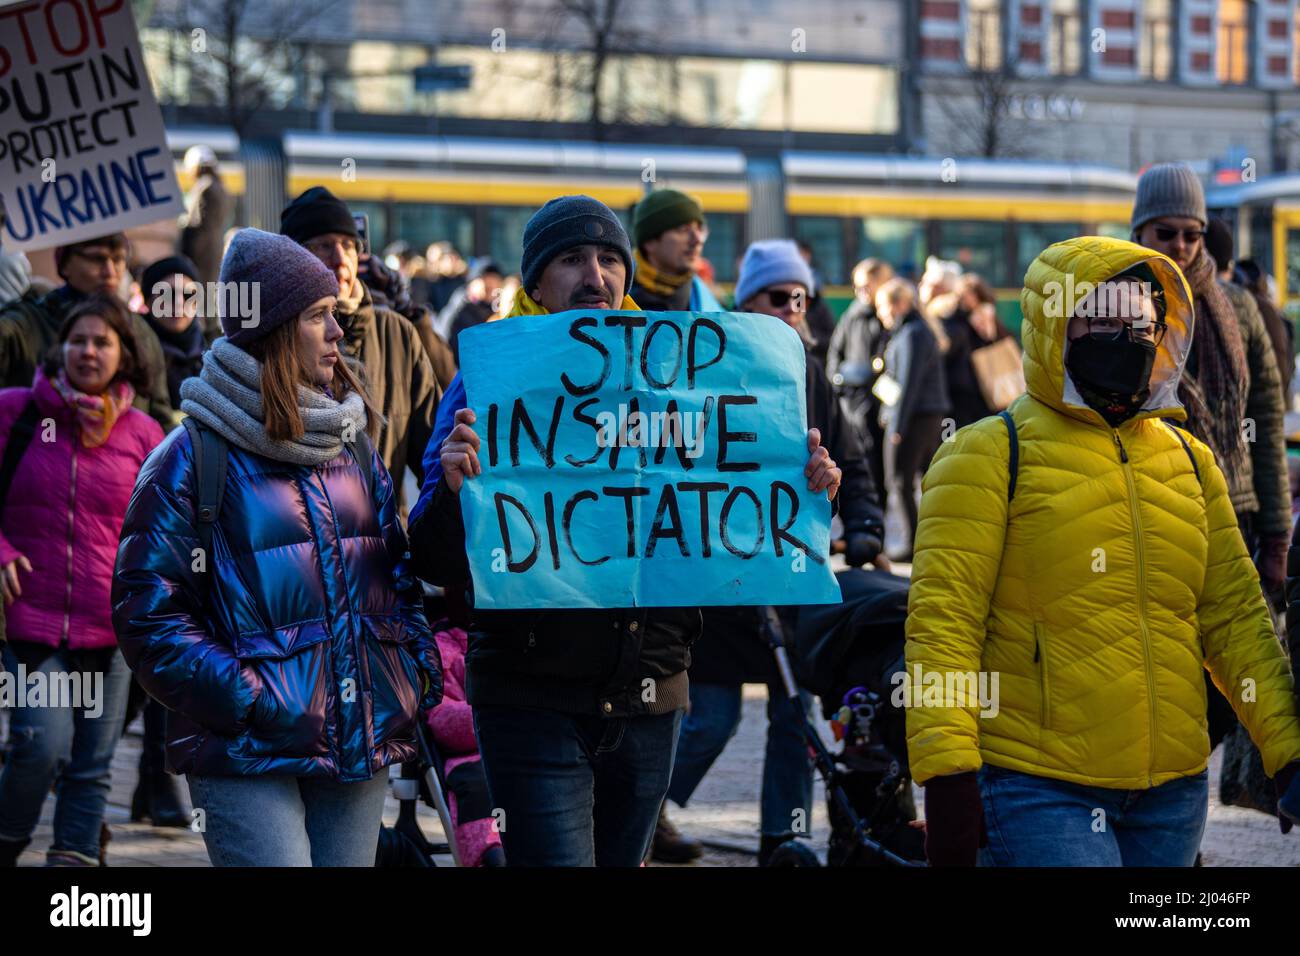 Stop insane dictator. Man holding a blue paper sheet at protest against invasion of Ukraine in Helsinki, Finland. Stock Photo